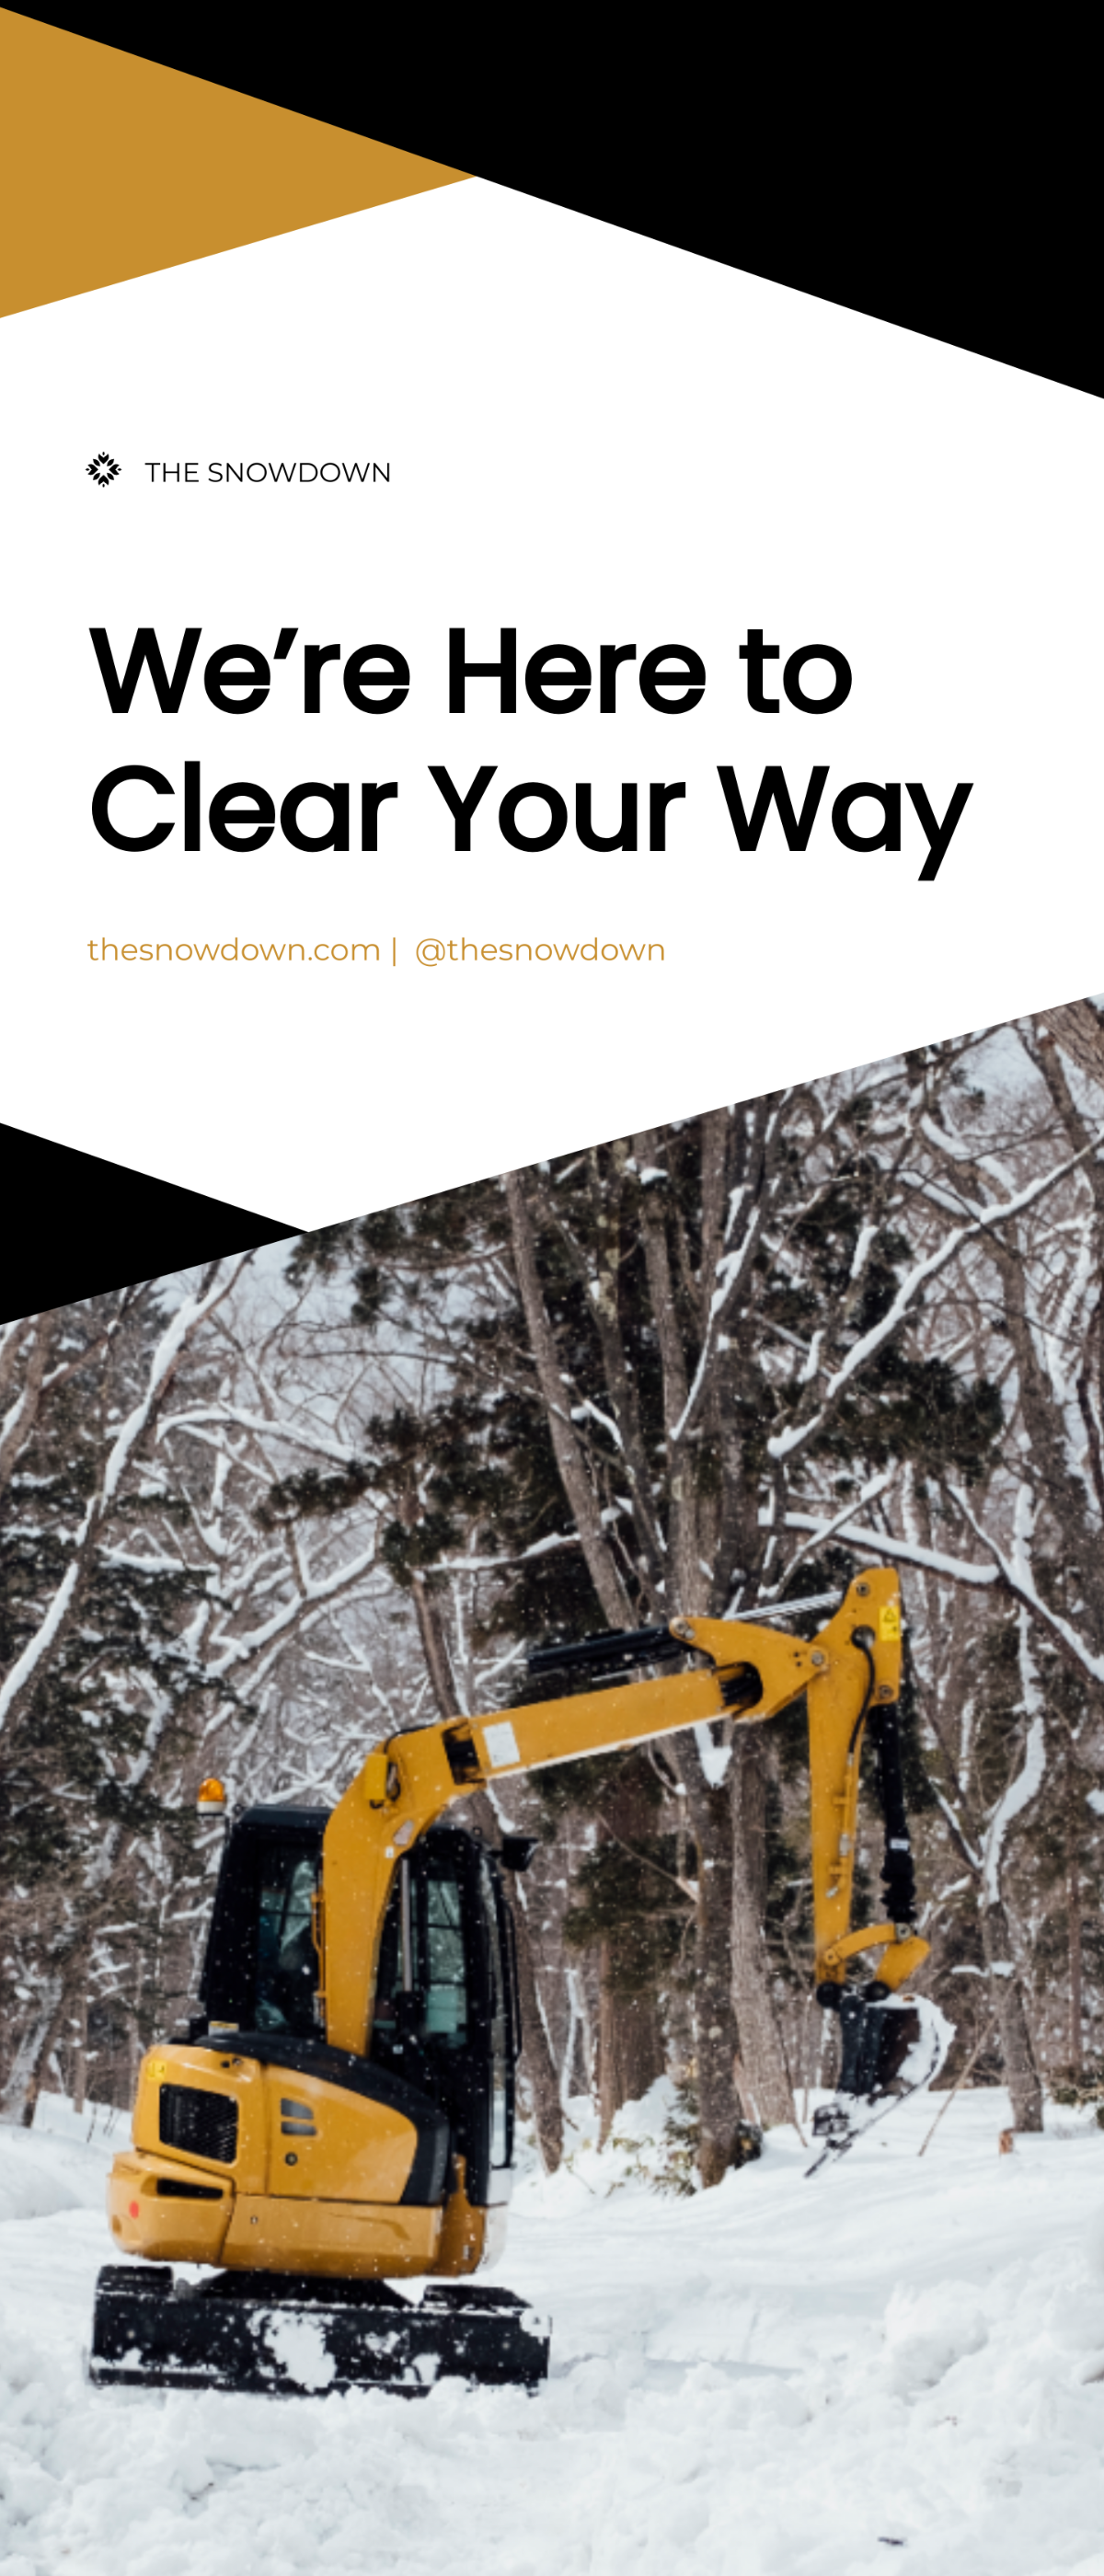 Snow Removal Service Roll Up Banner